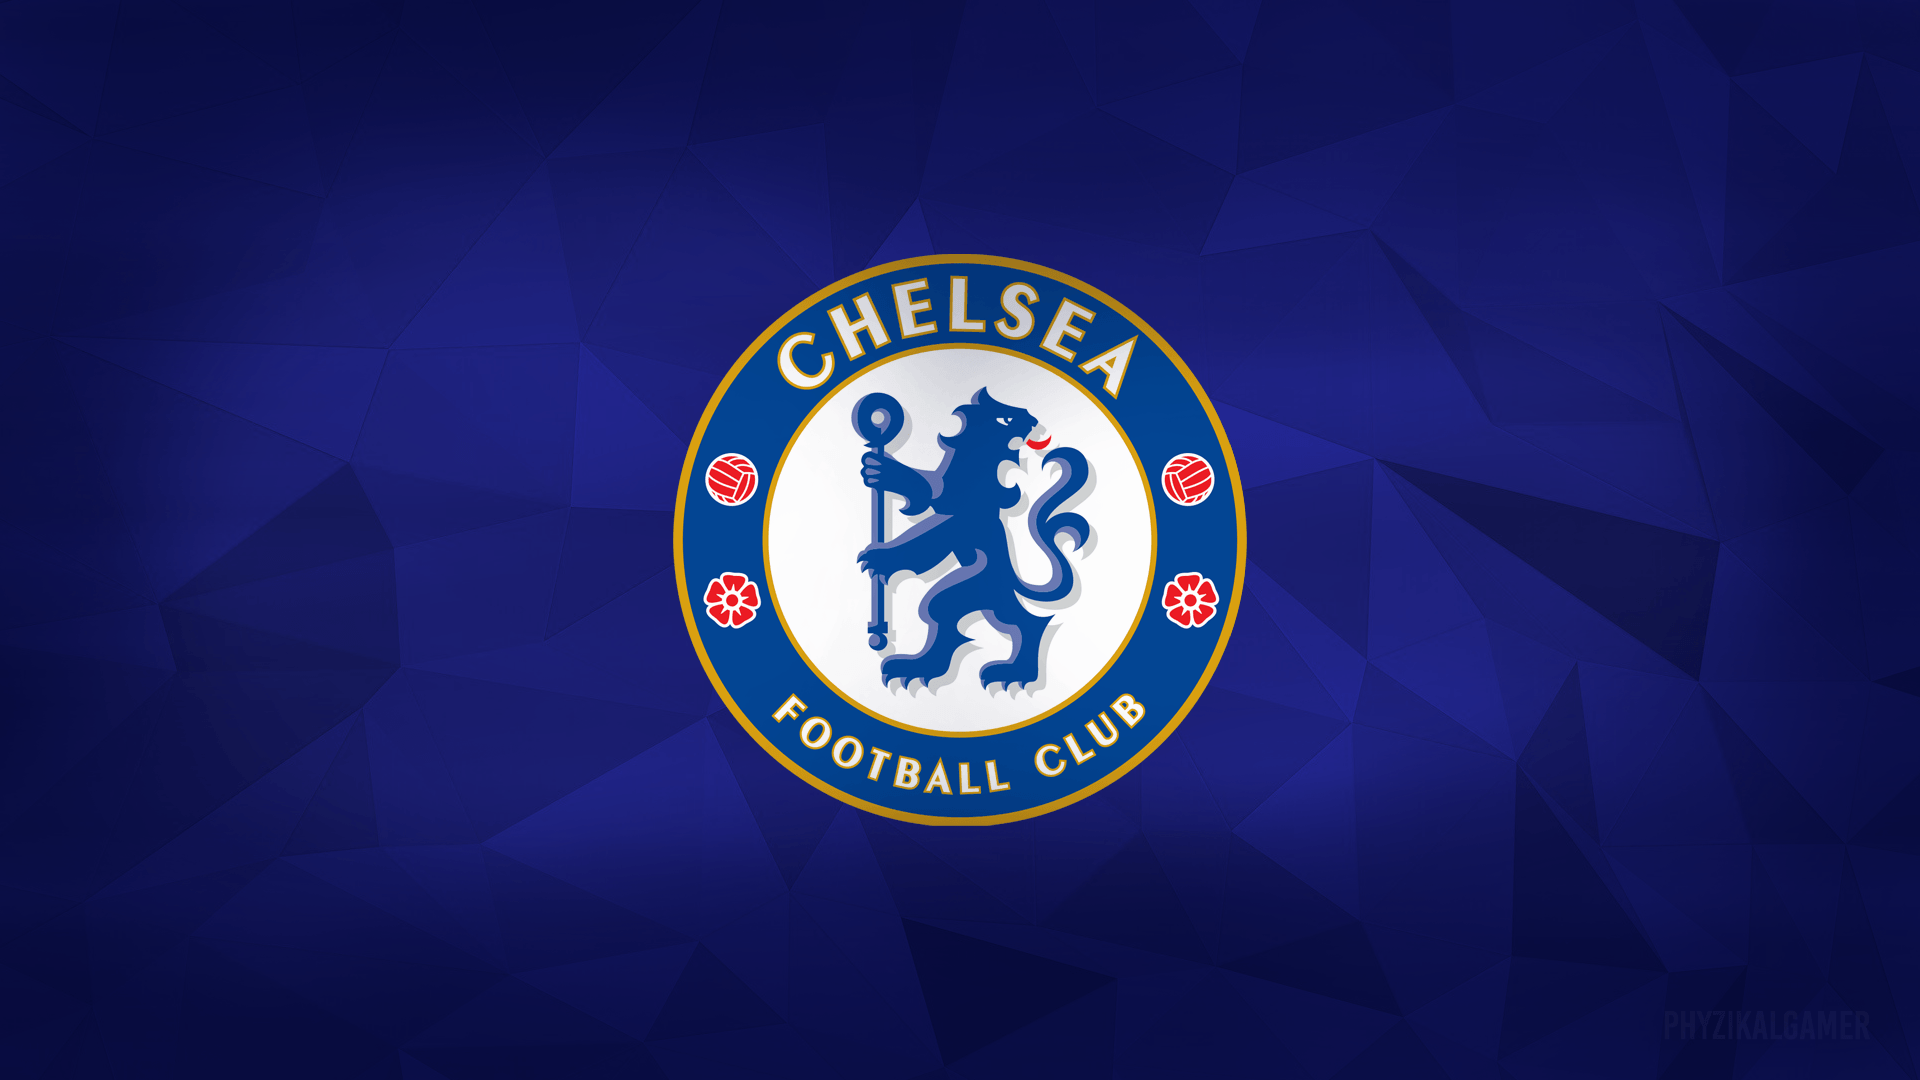 I Created Some Chelsea Nike Wallpaper, Thought I'd Share